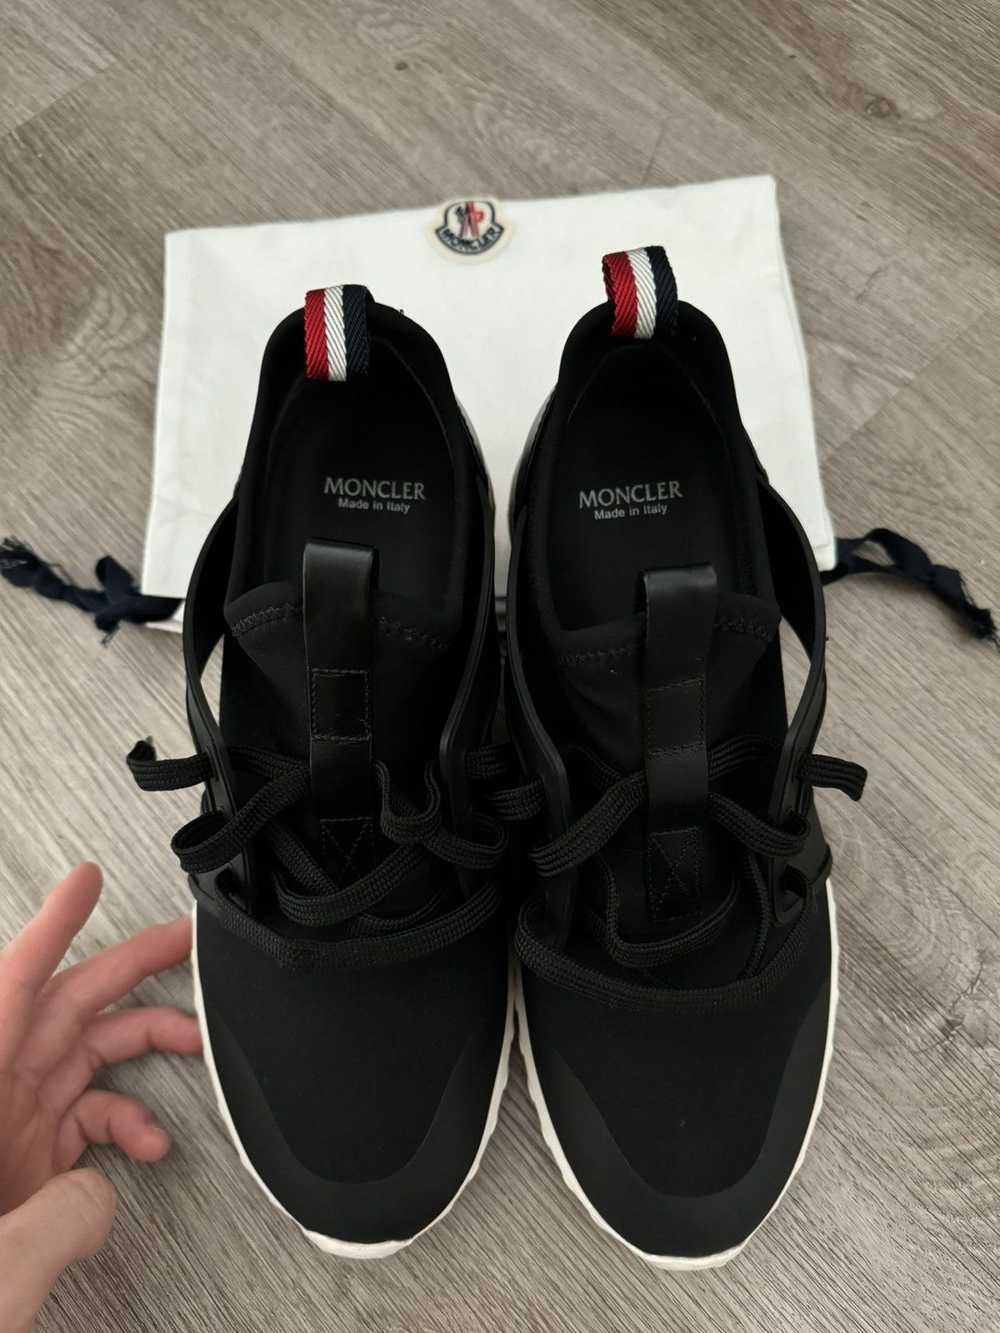 Moncler Moncler Sneakers - image 4